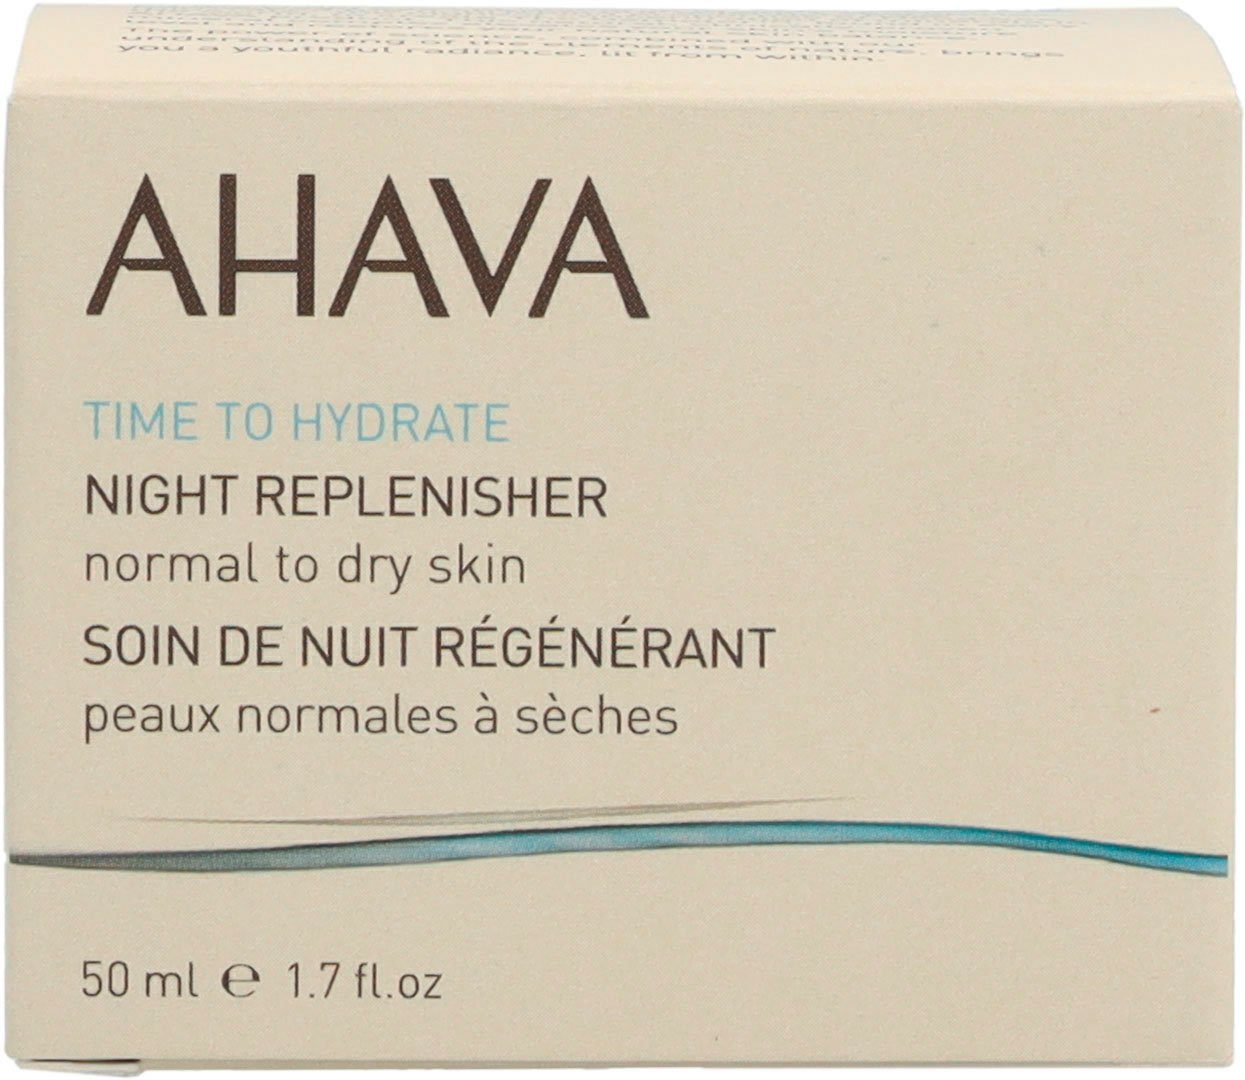 AHAVA Nachtcreme Hydrate Normal Night Time To Replenisher Dry